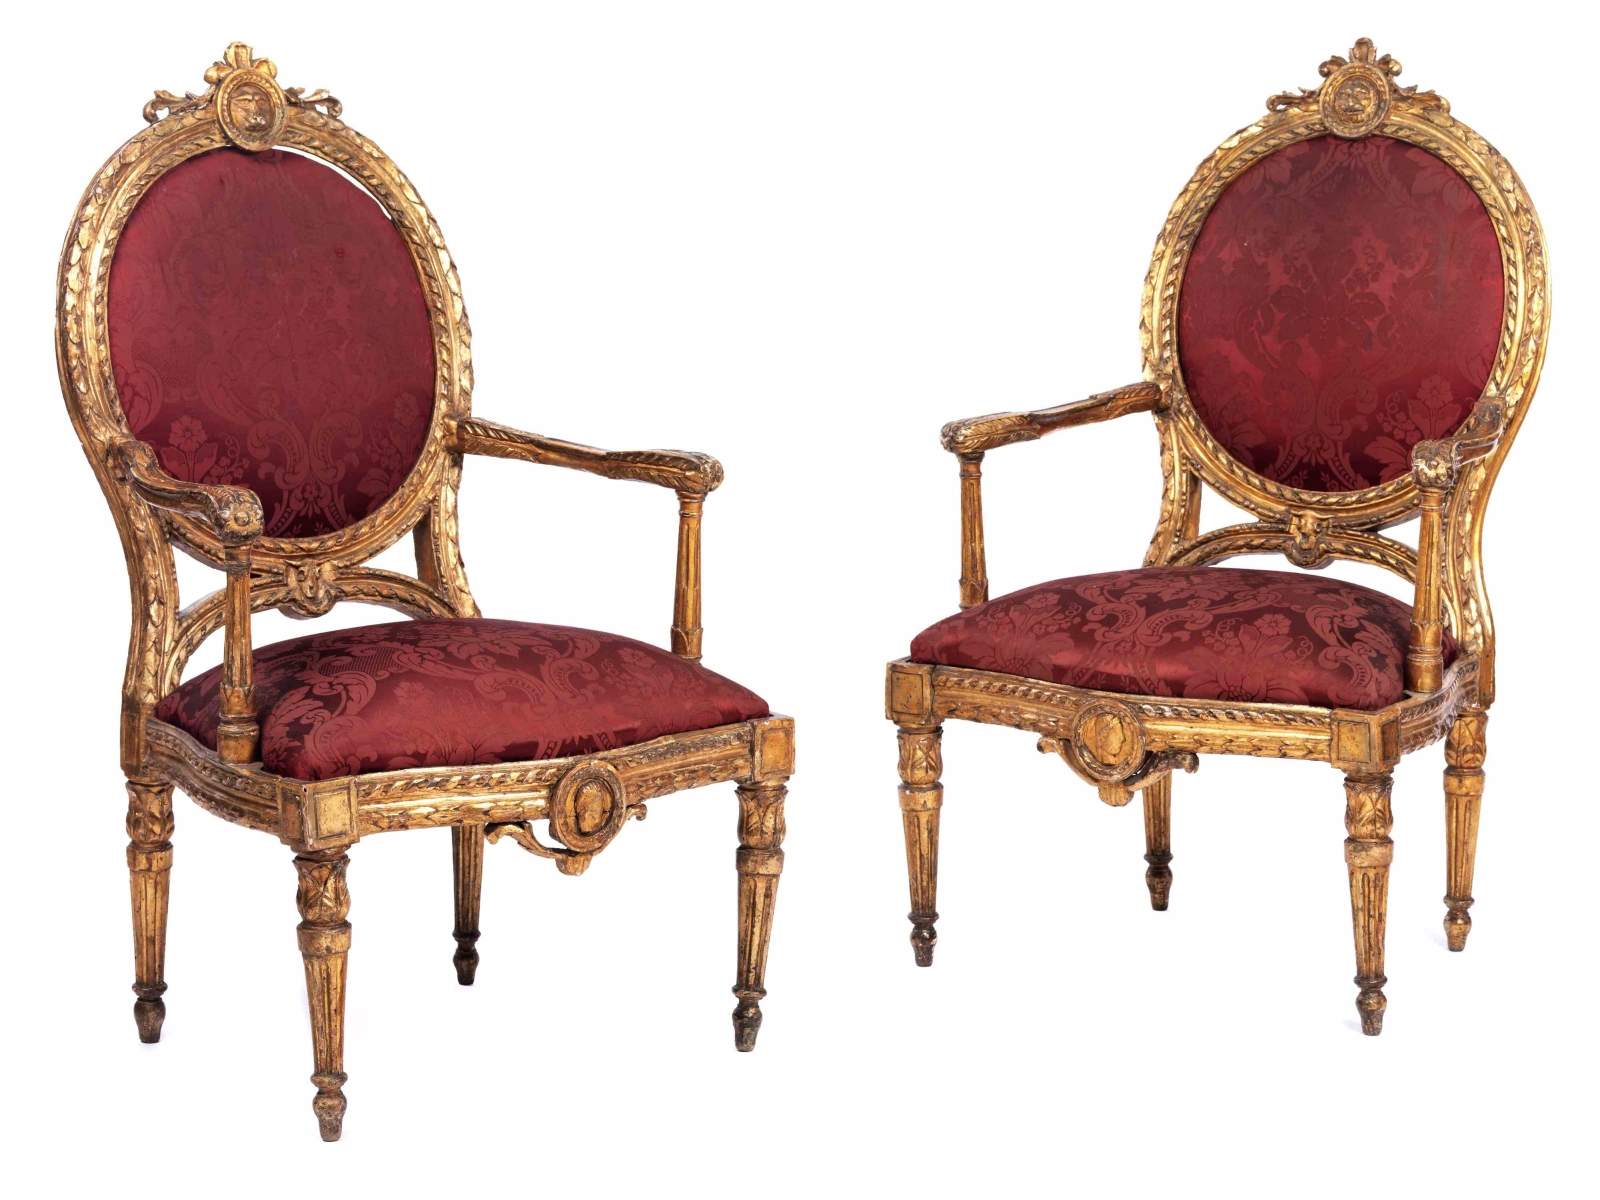 Pair of stately Louis XVI fauteuilsHeight: 118 cm. Width: 74 cm. Depth: ca. 60 cm. Italy, 18th - Image 5 of 5